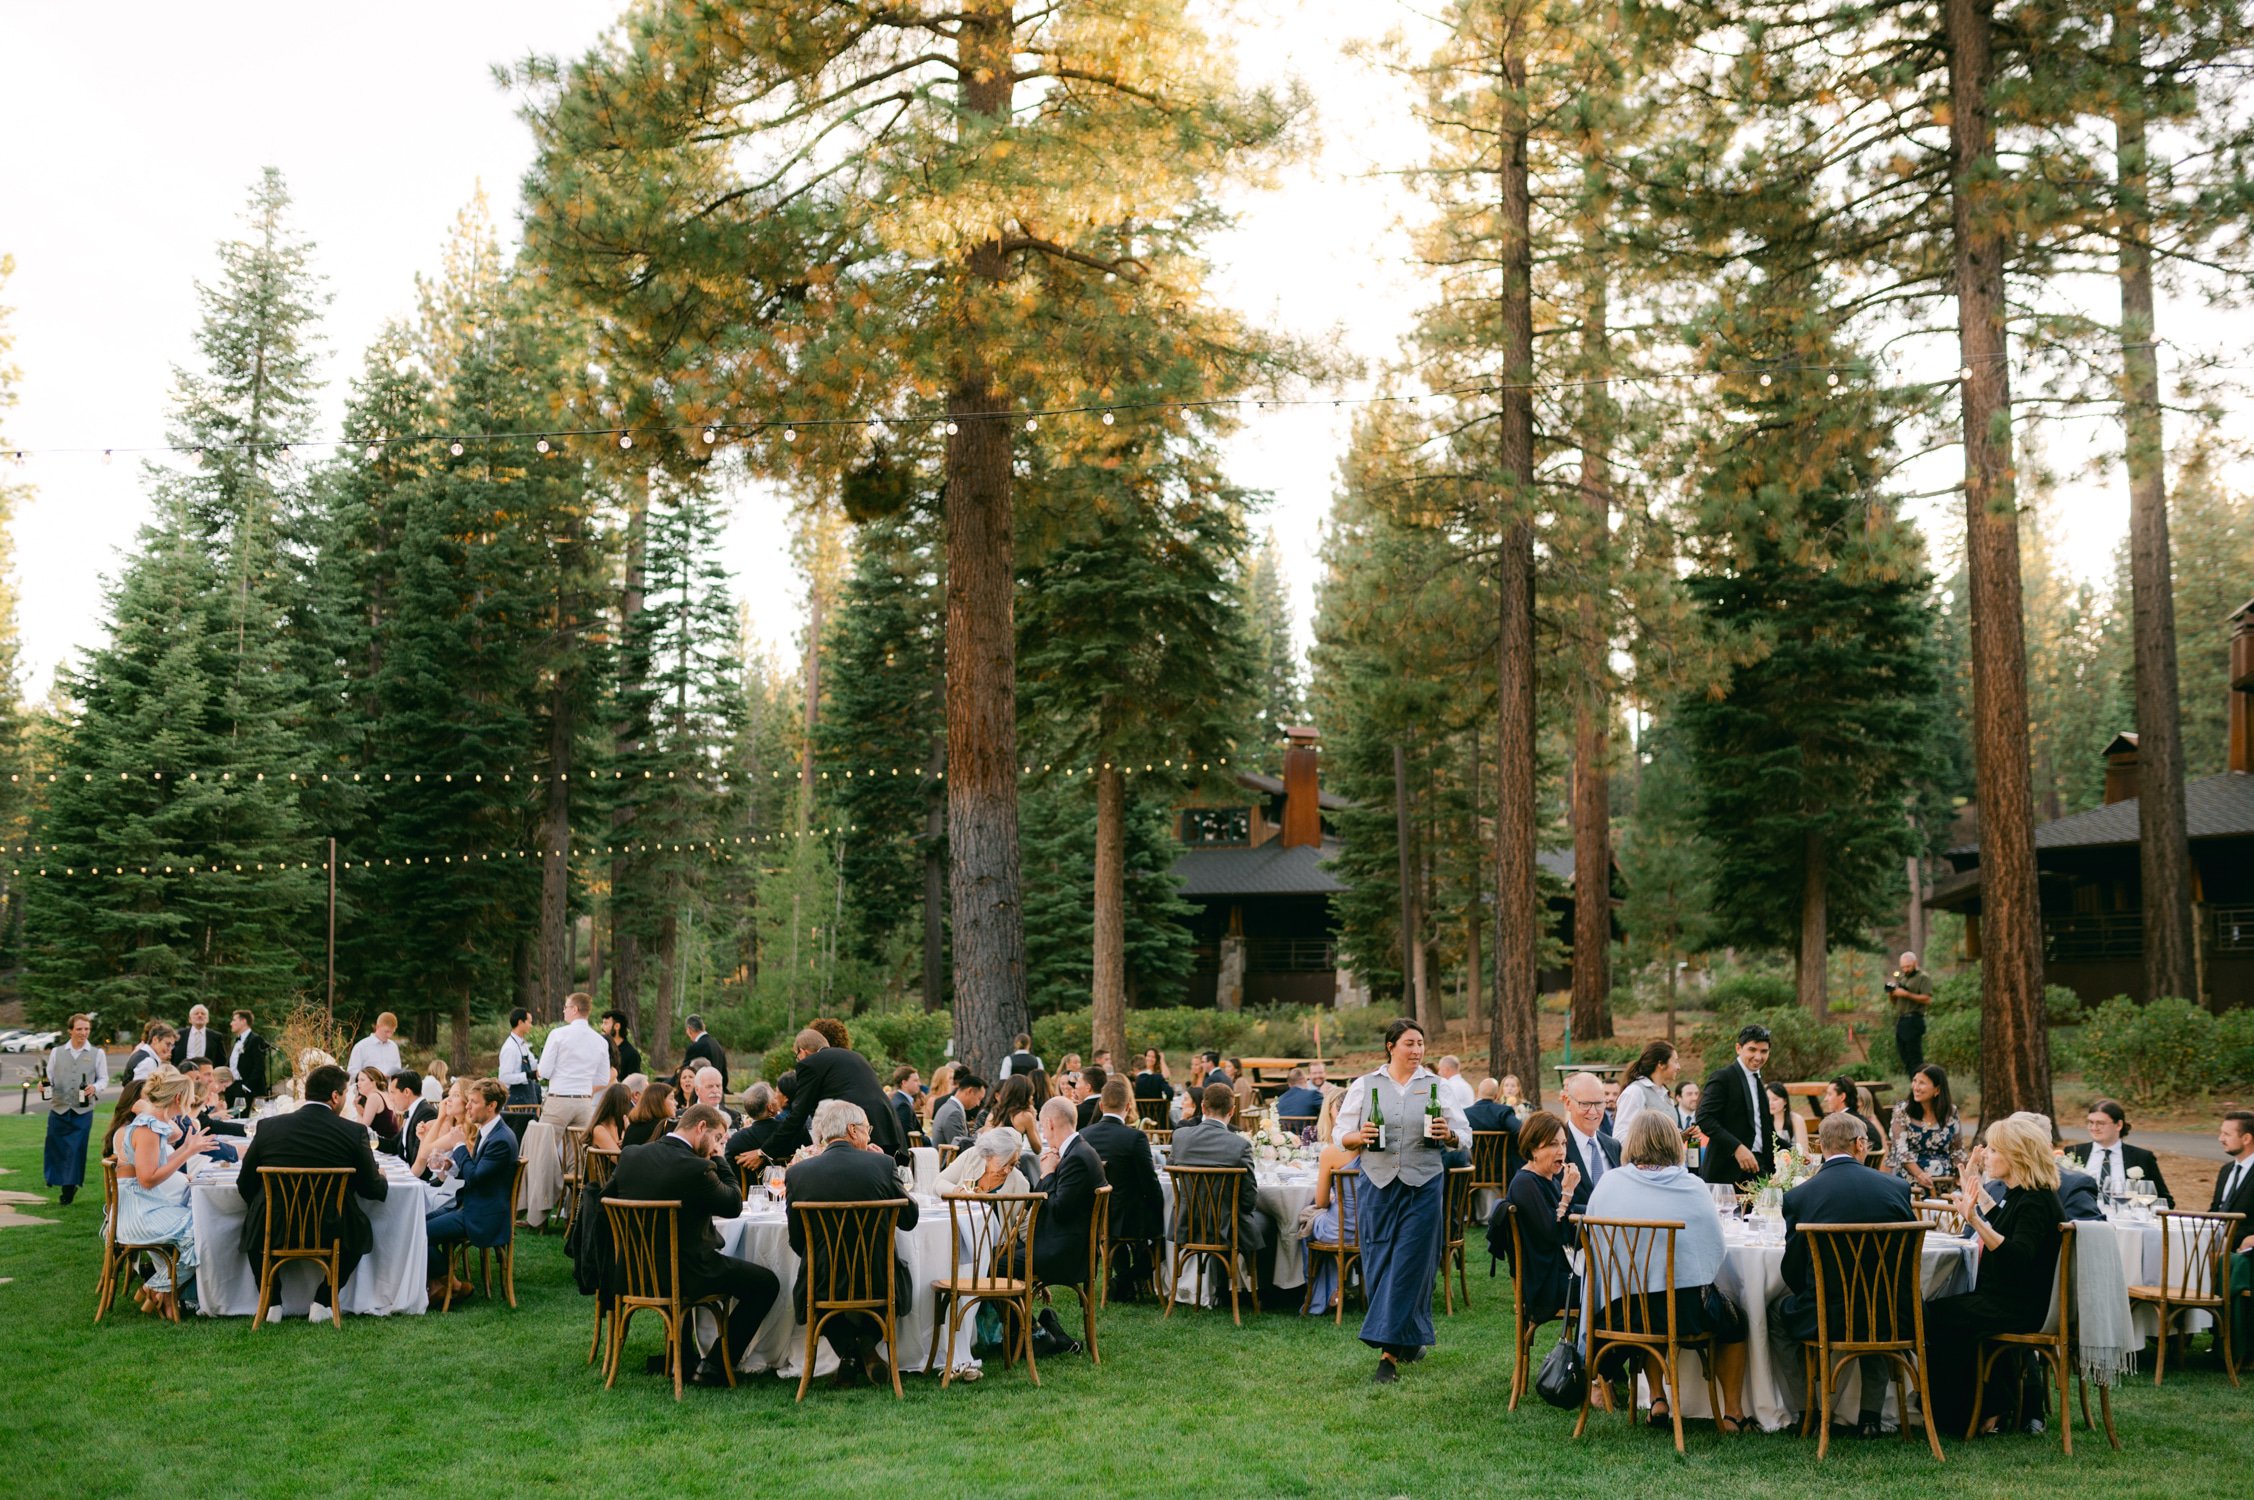 Martis Camp Wedding, photo of the wedding guests sitting in the outdoor wedding reception surrounded by tall trees